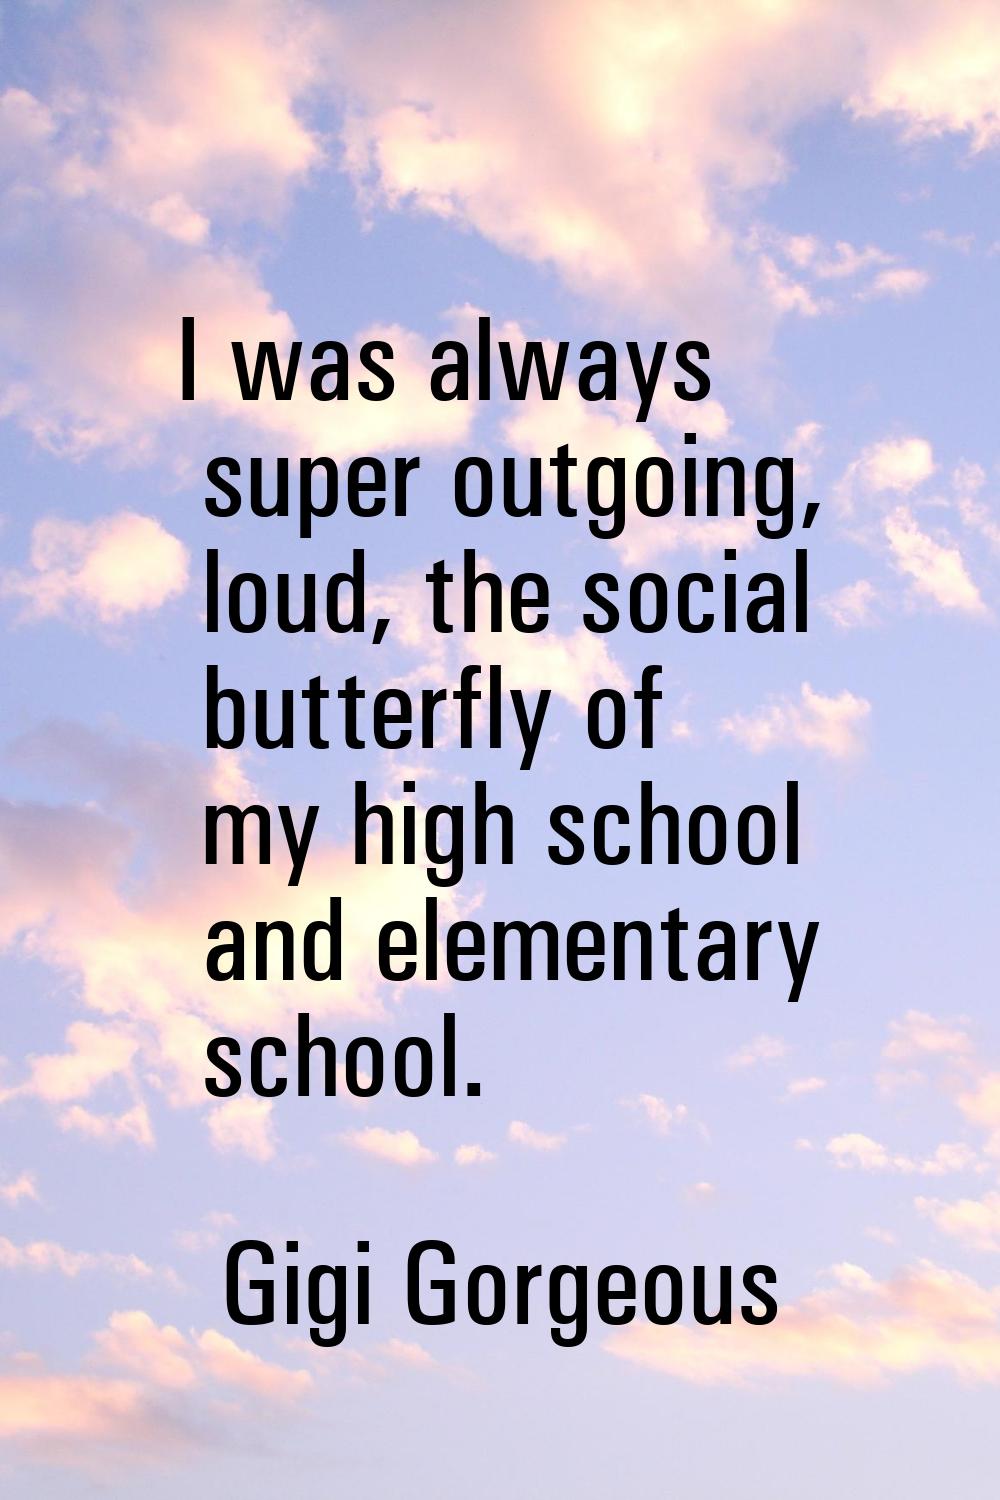 I was always super outgoing, loud, the social butterfly of my high school and elementary school.